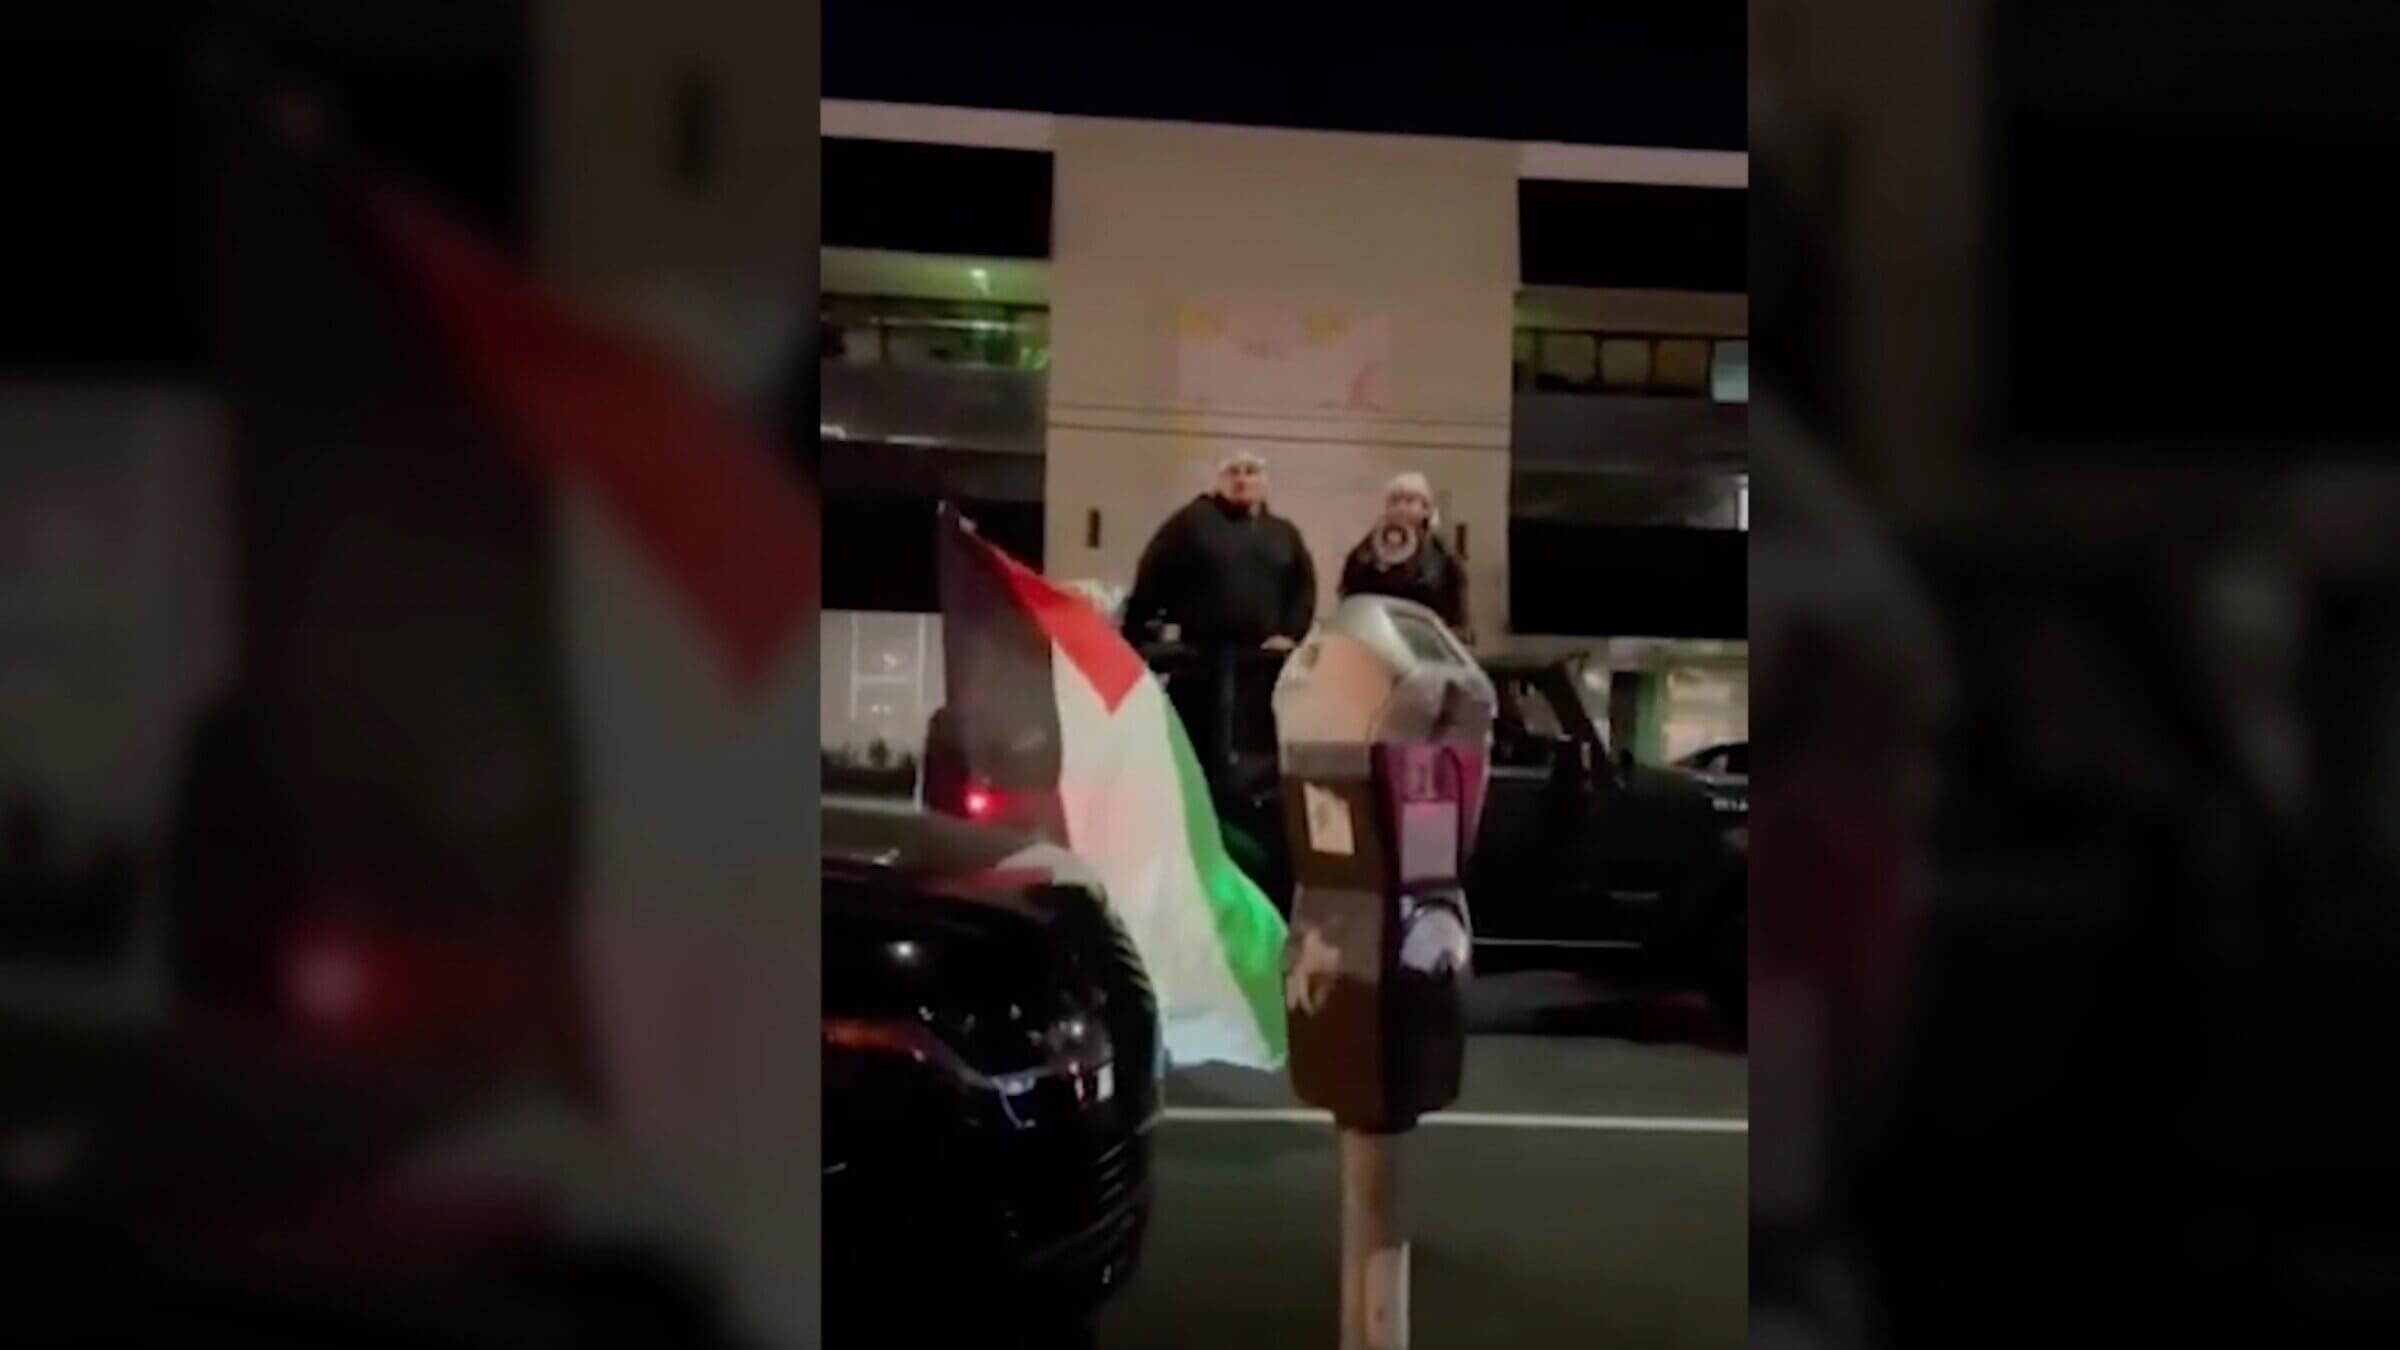 Protesters shout anti-Israel slogans in front of a Los Angeles restaurant shortly before a violent confrontation with Jewish and non-Jewish diners. May 18, 2021. 